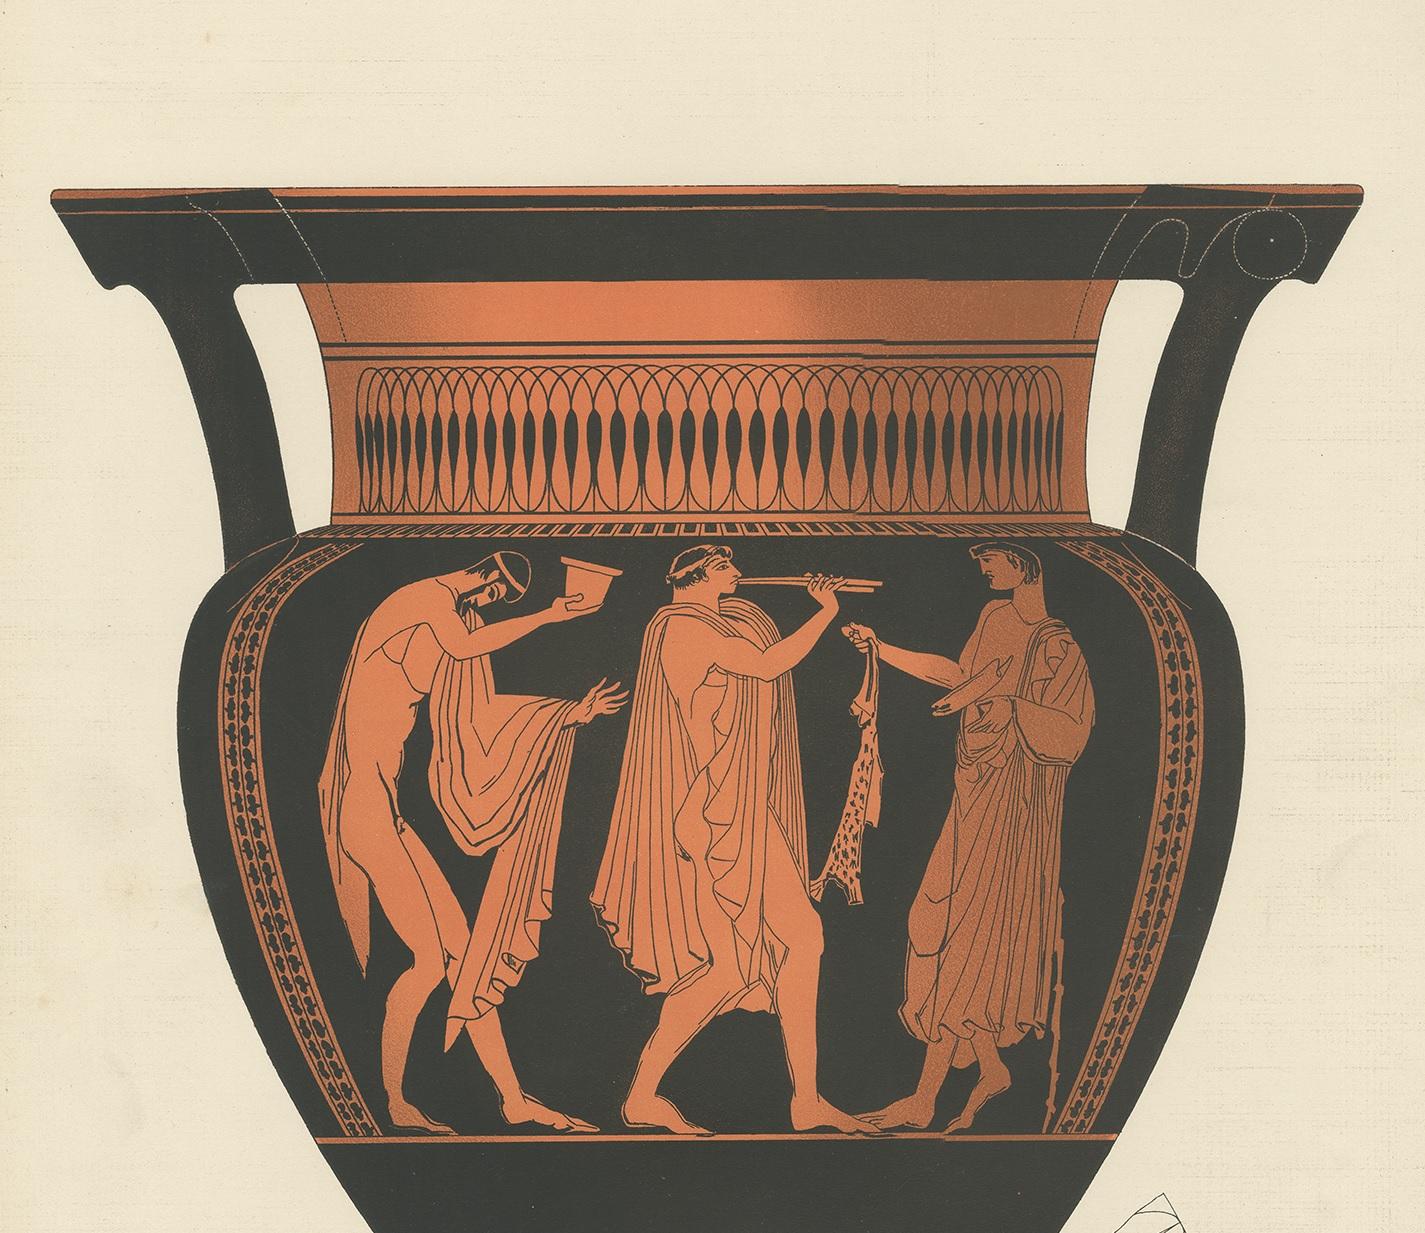 Antique print titled 'Krater'. Color-printed large lithograph by Ernst Wasmuth depicting a Greek krater (ancient vase). This print originates from 'Griechische Keramik' by A. Genick. Albert Genick, an architect by training, was one of the leading